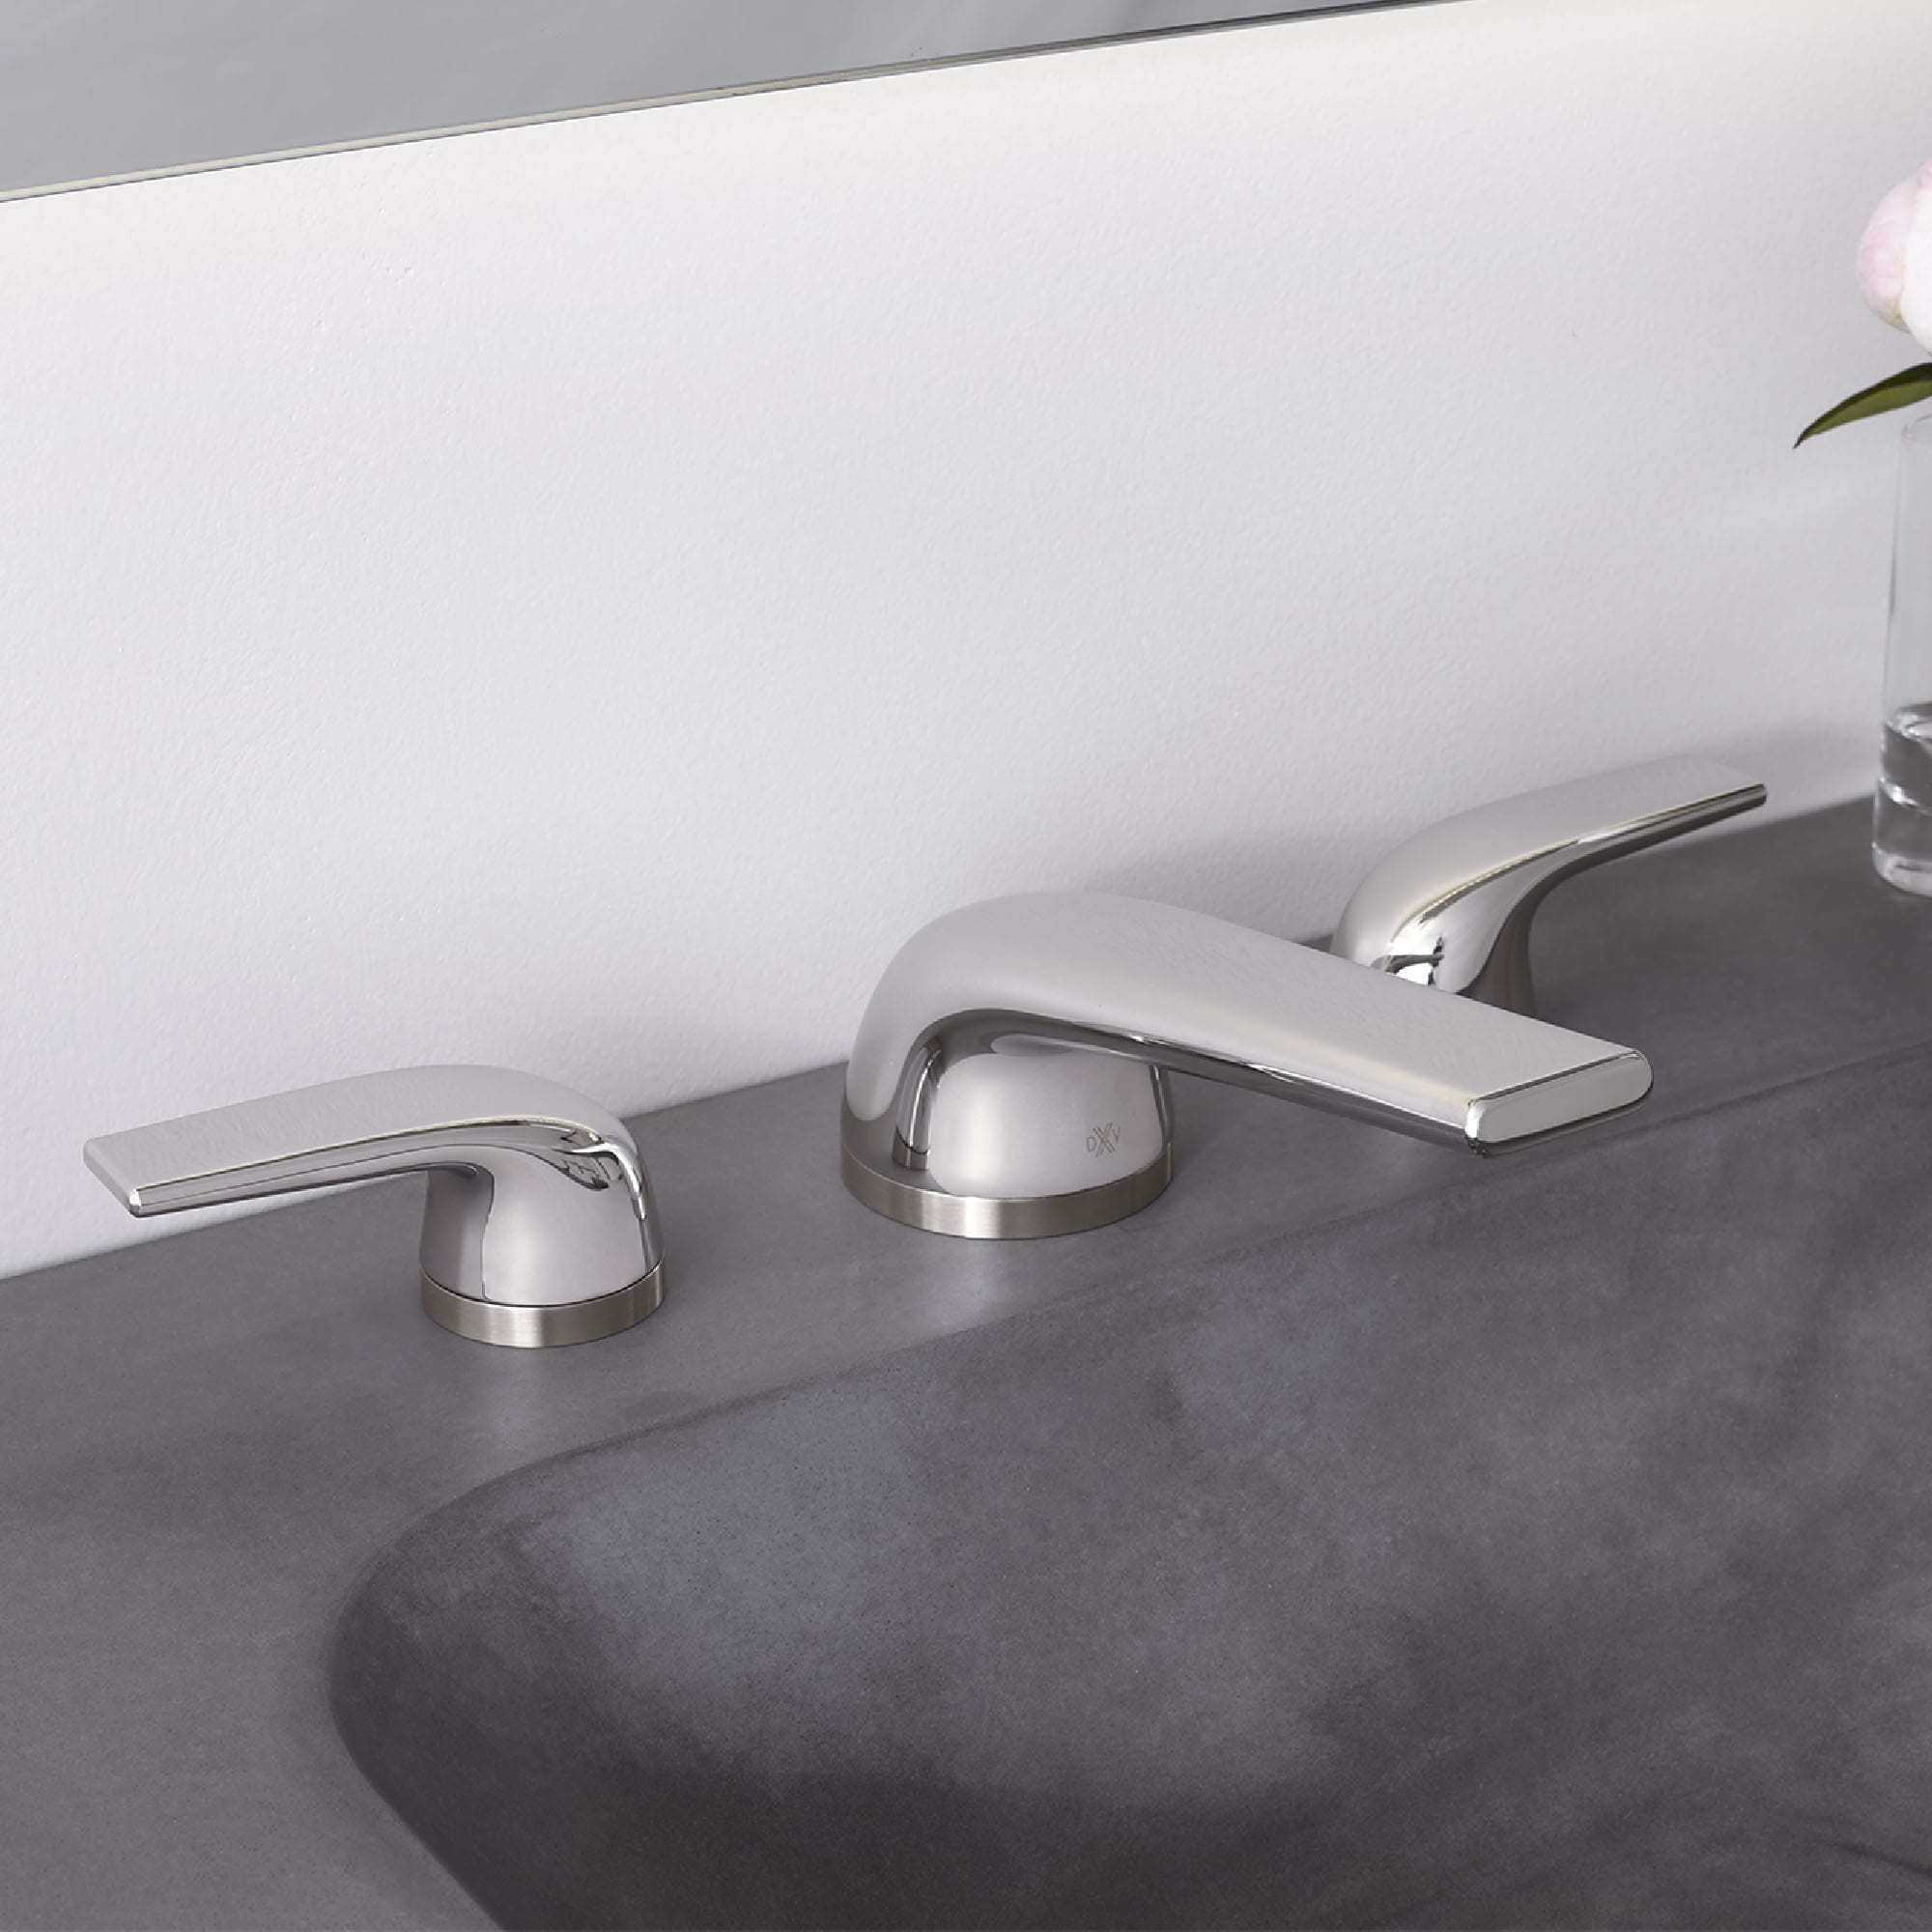 DXV Modulus 2-Handle Widespread Bathroom Faucet with Lever Handles